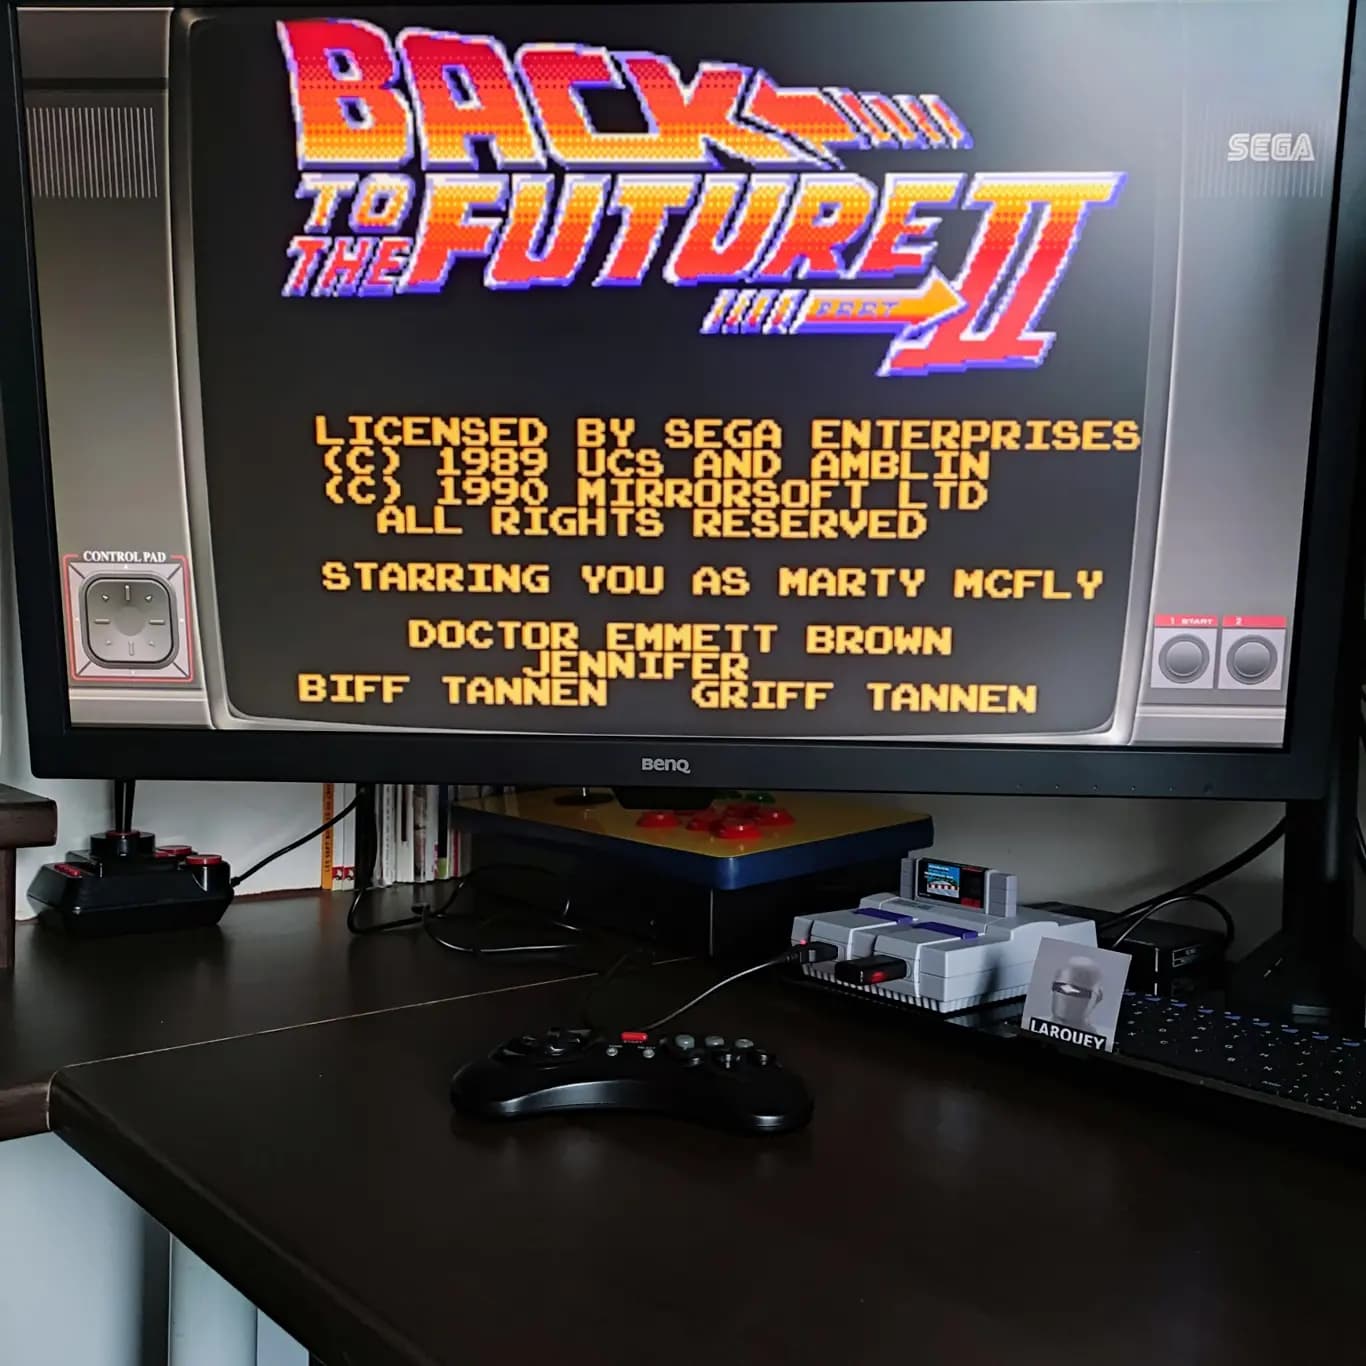 Larquey: Back to The Future Part II (Sega Master System Emulated) 200 points on 2022-08-15 01:32:10